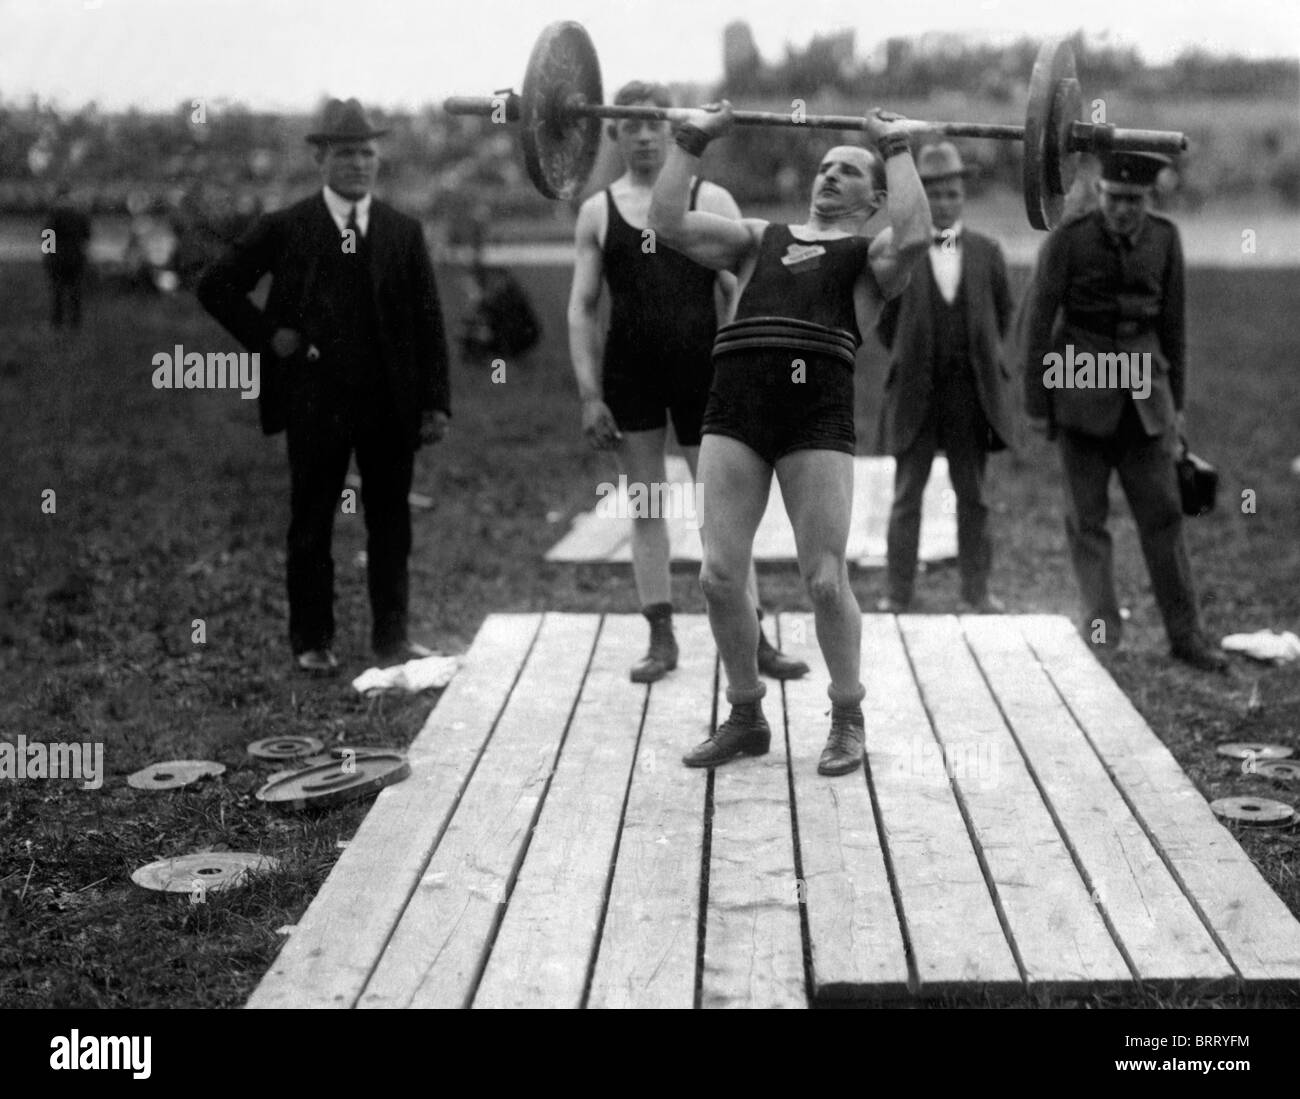 Weightlifters, historic photograph, around 1910 Stock Photo